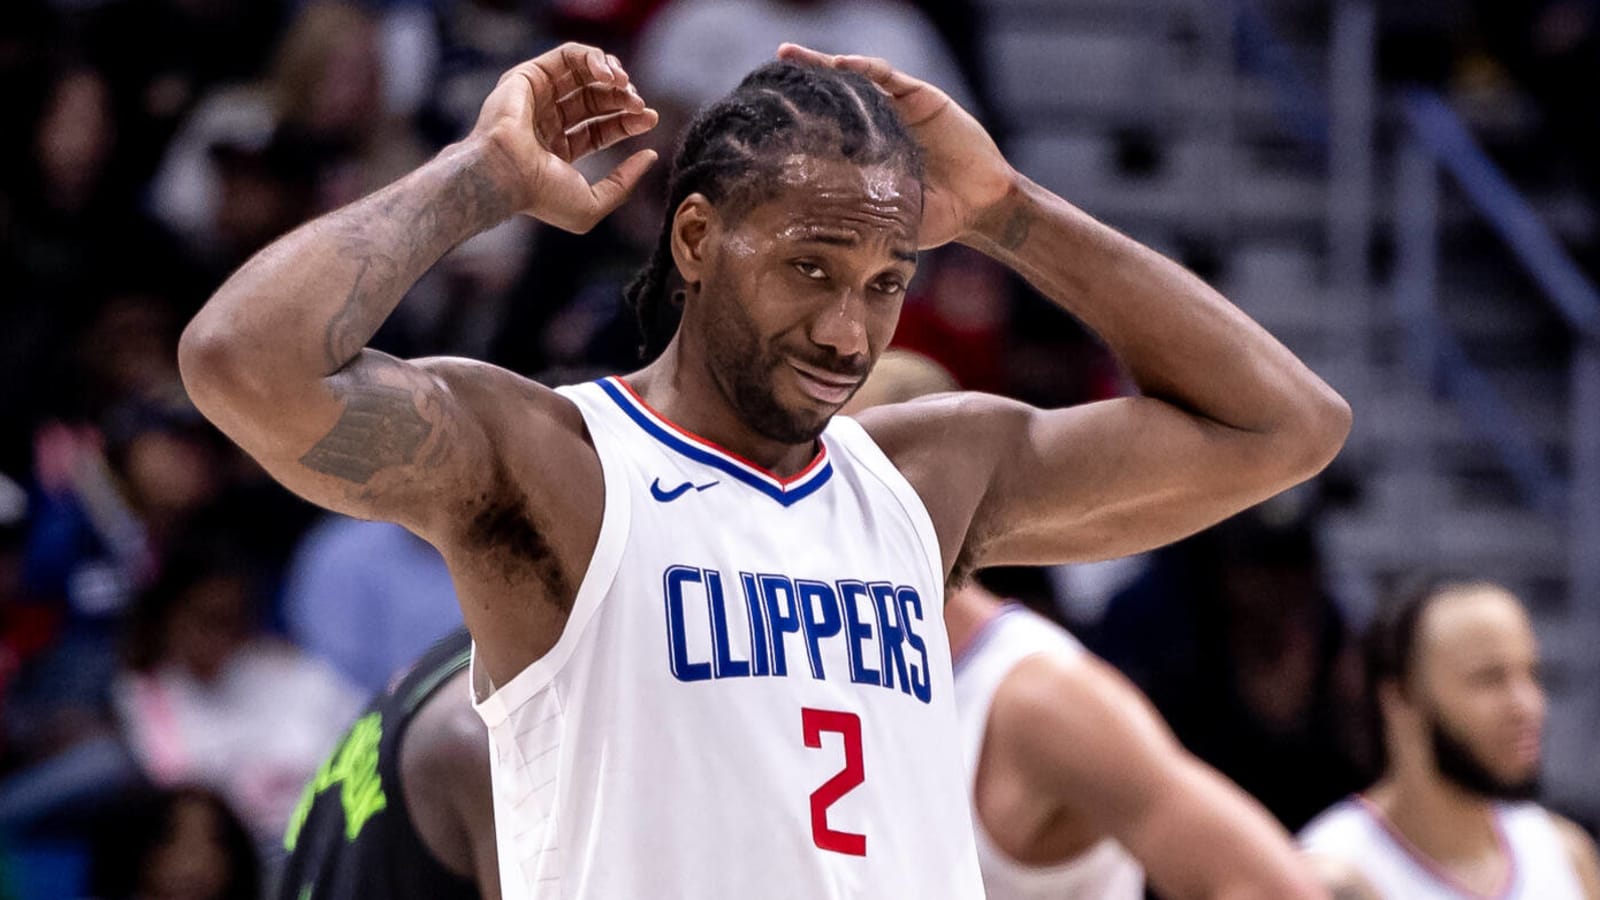 'Increasing doubt' that Clippers star will play in Game 1